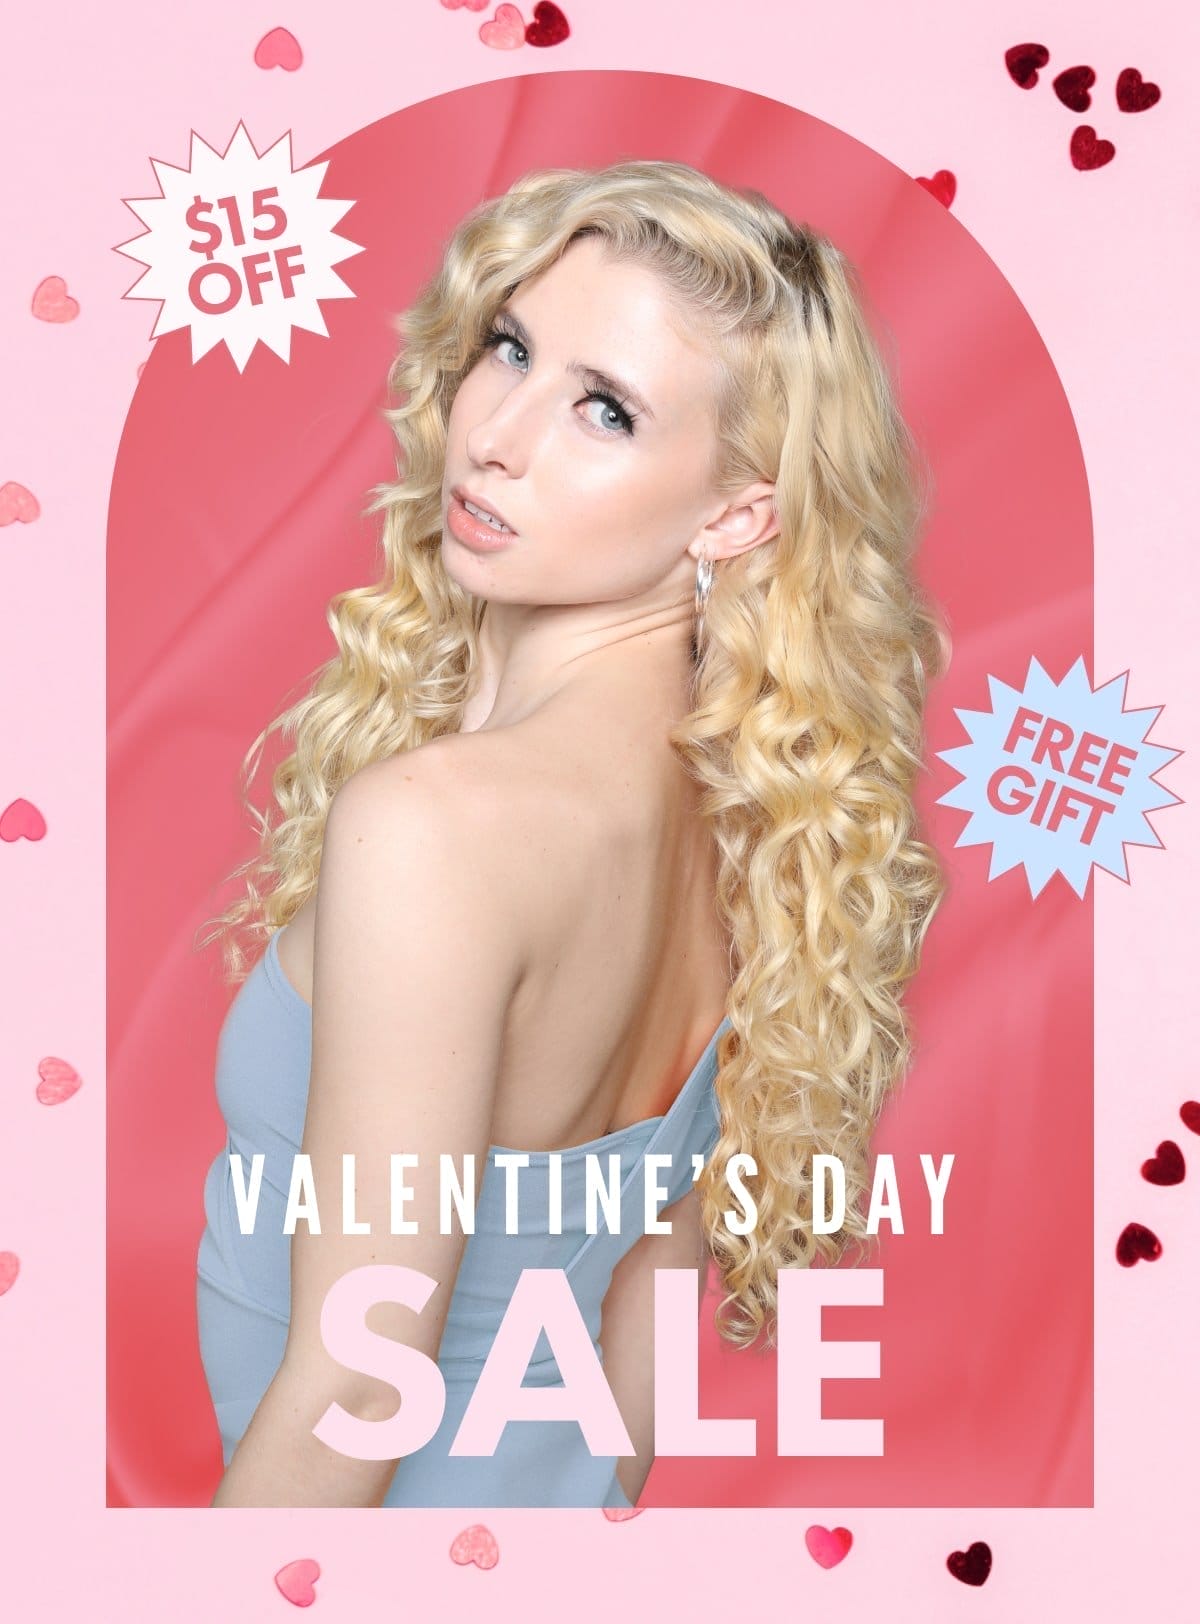 Valentine's Day Sale - \\$15 Off + A Free Gift!